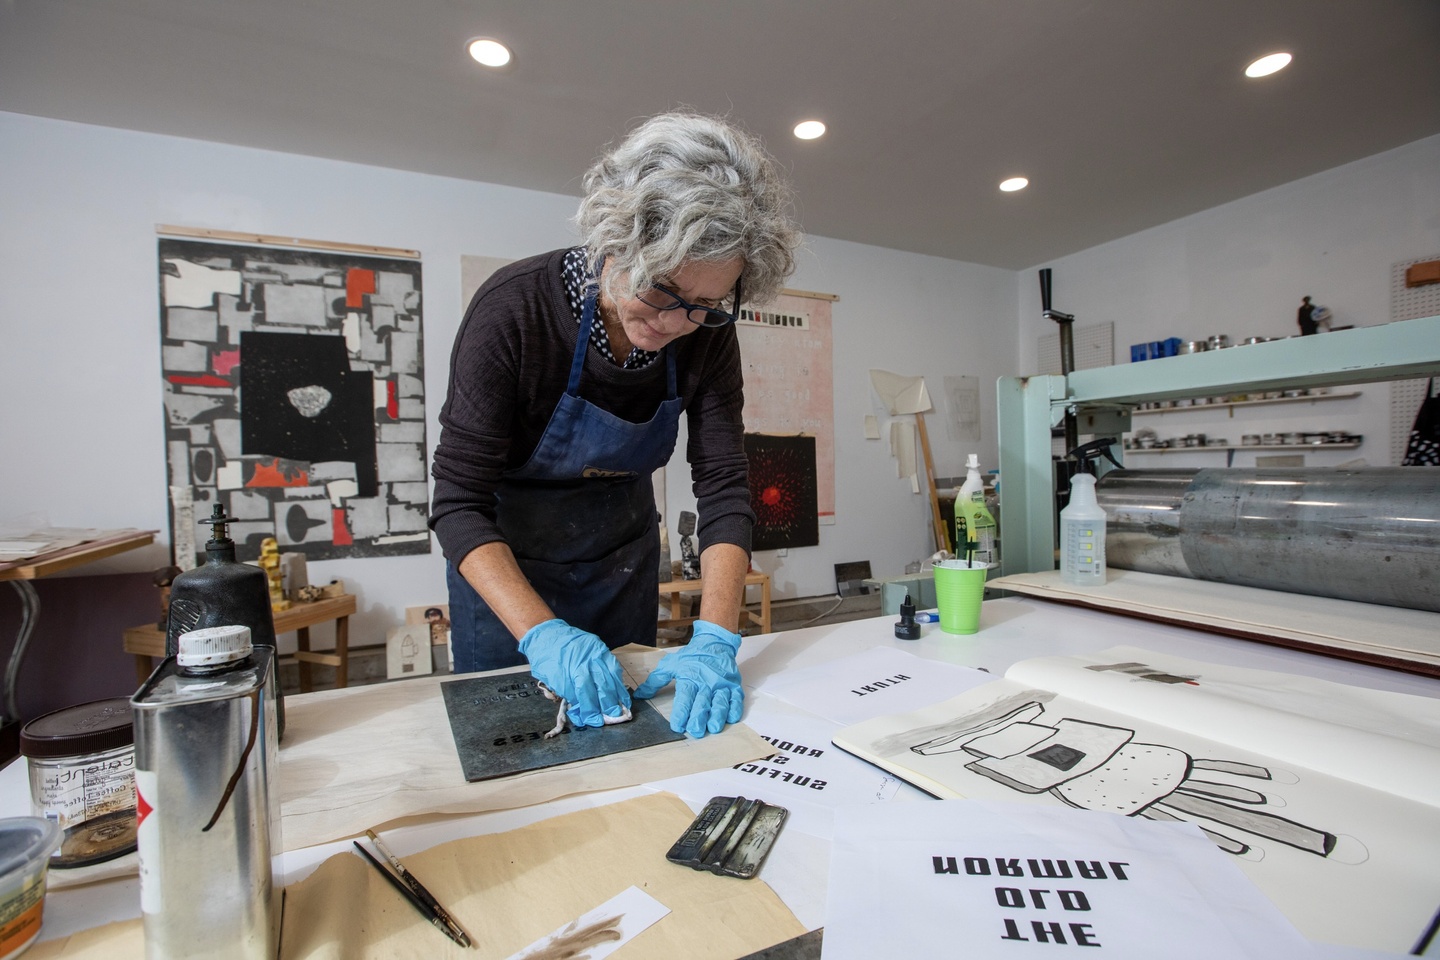 Lisa Bulawsky working in her studio. Numerous papers and drawings are scattered on her table; she is wearing blue gloves while working on a transfer plate. Artworks are hung on the back wall.